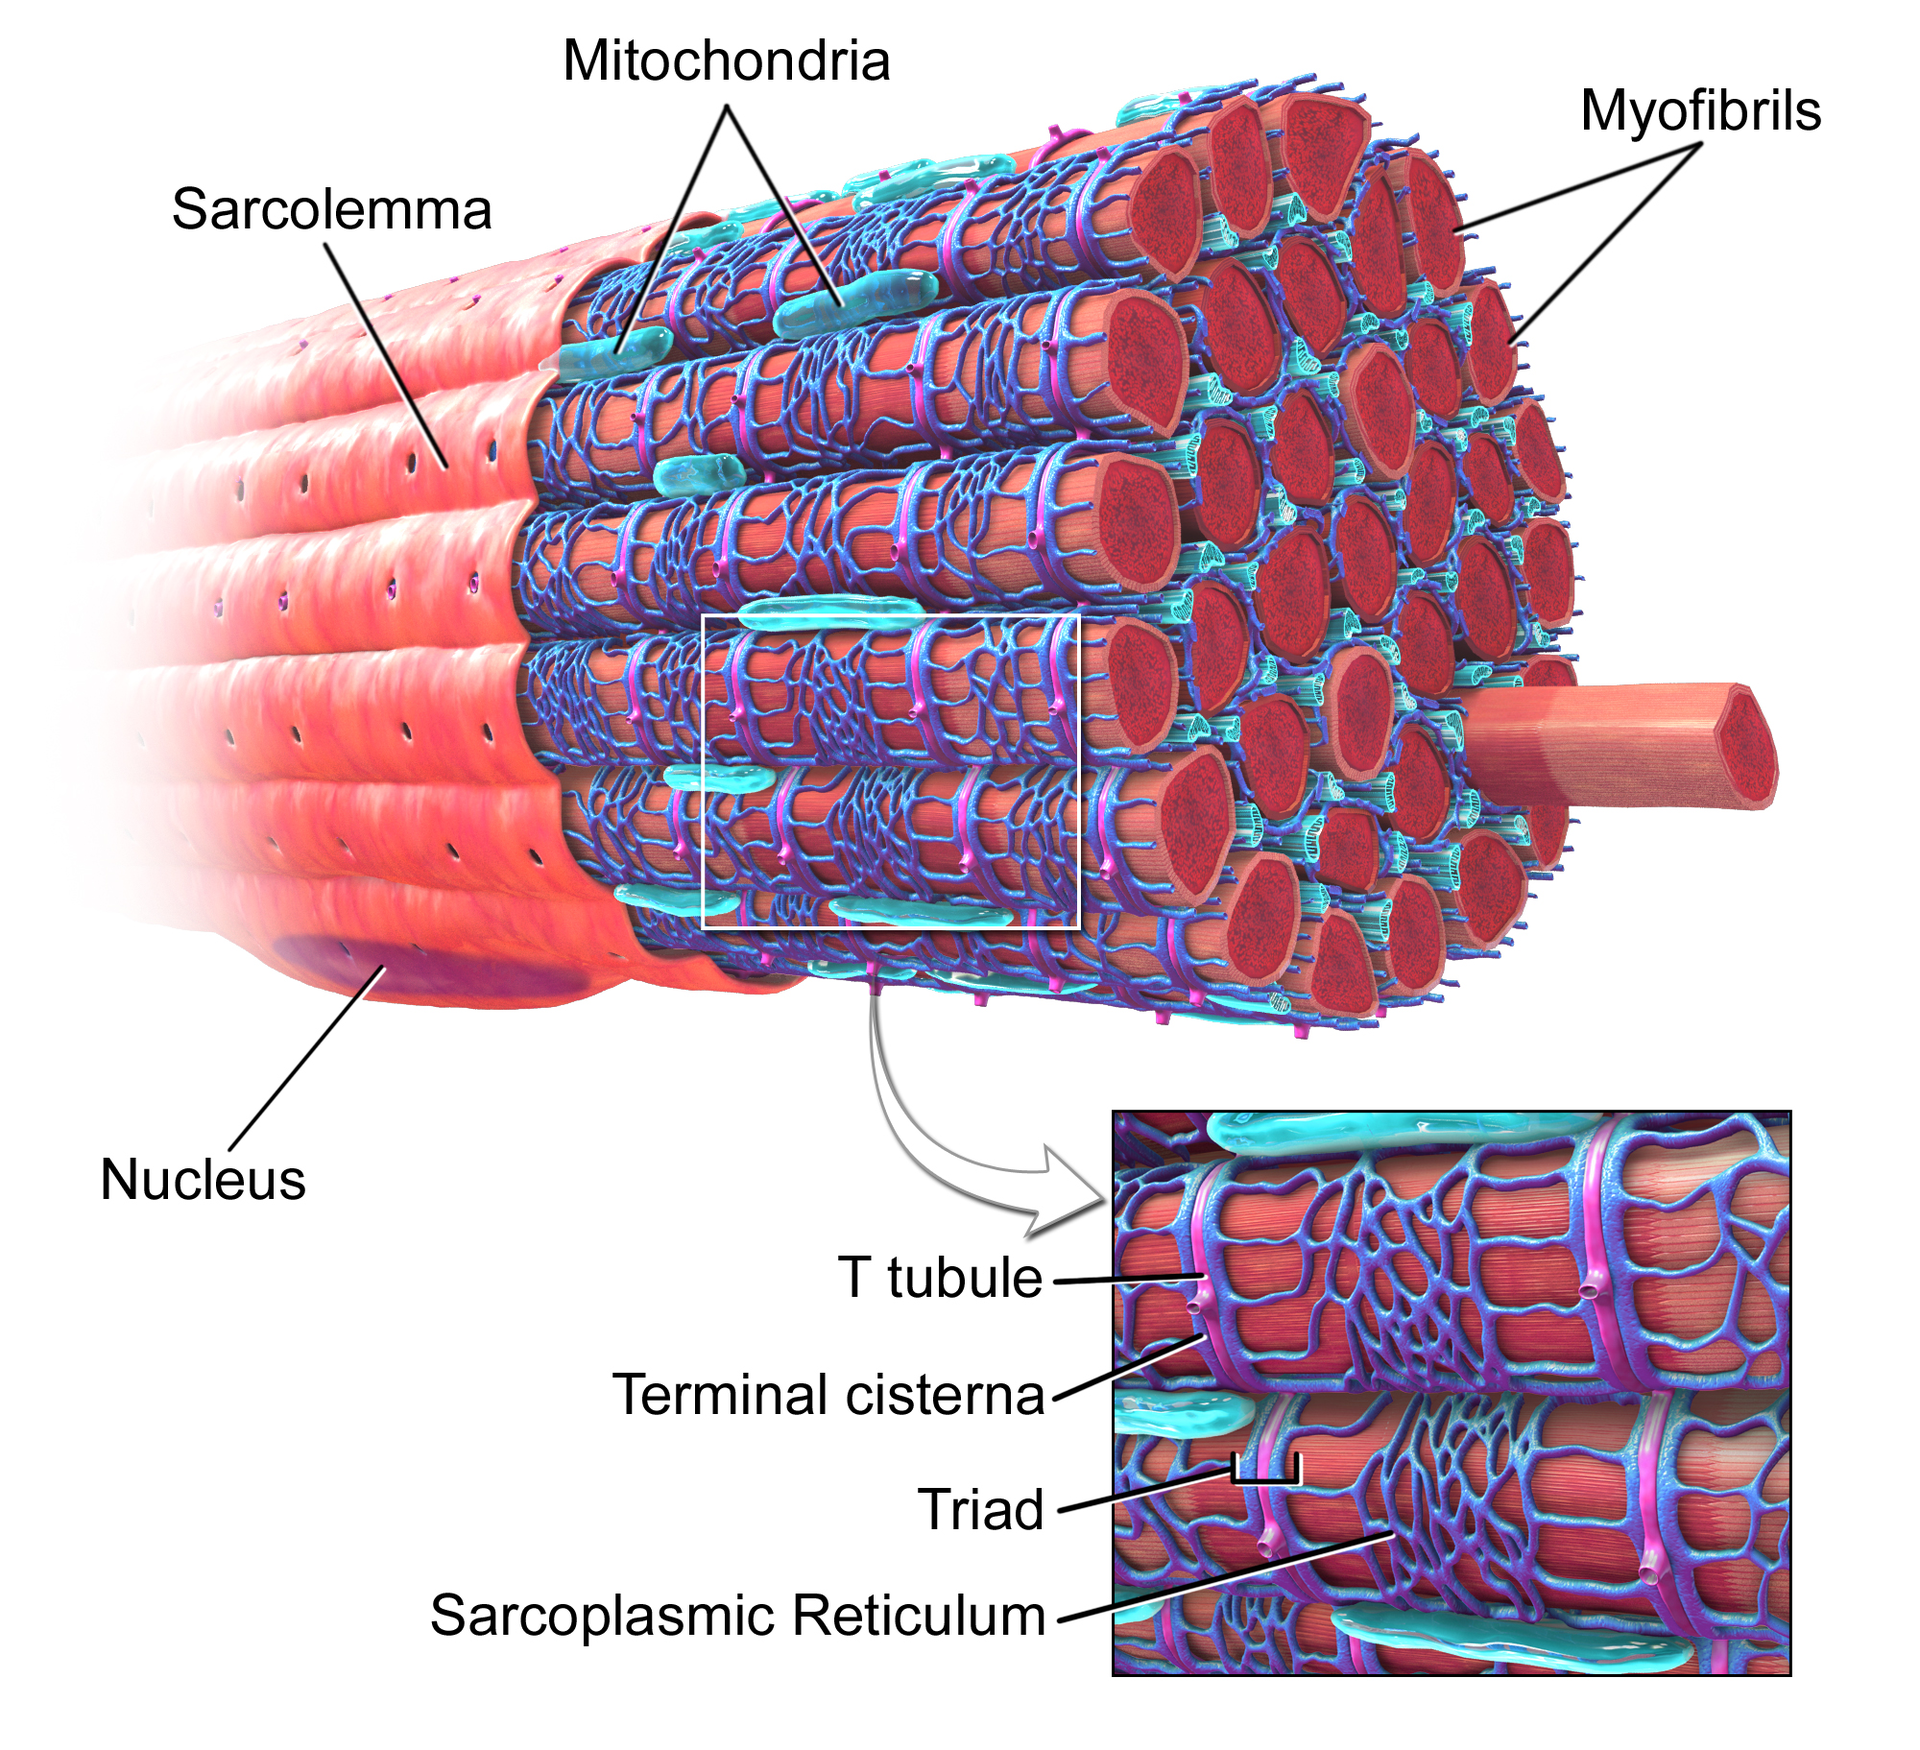 T-tubules (transverse tubules) are extensions of the cell membrane that penetrate into the center of skeletal and cardiac muscle cells